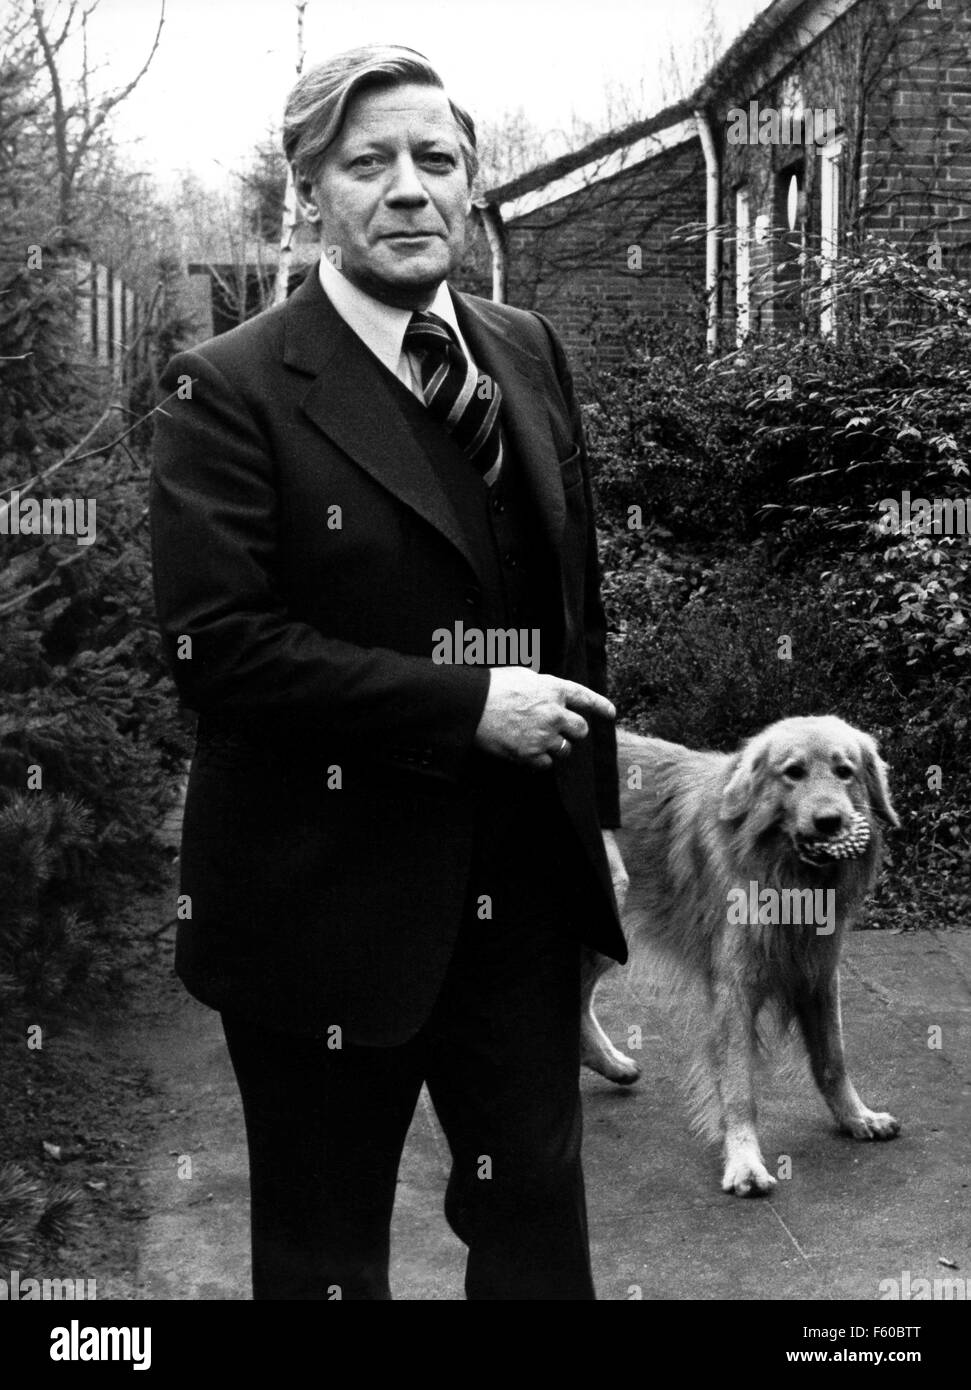 Helmut Schmidt with his dog Jaspis in front of his house in Hamburg-Langhorn on his 59th birthday on 23 December 1977. On 23 December 2003, he becomes 85 years old. Stock Photo